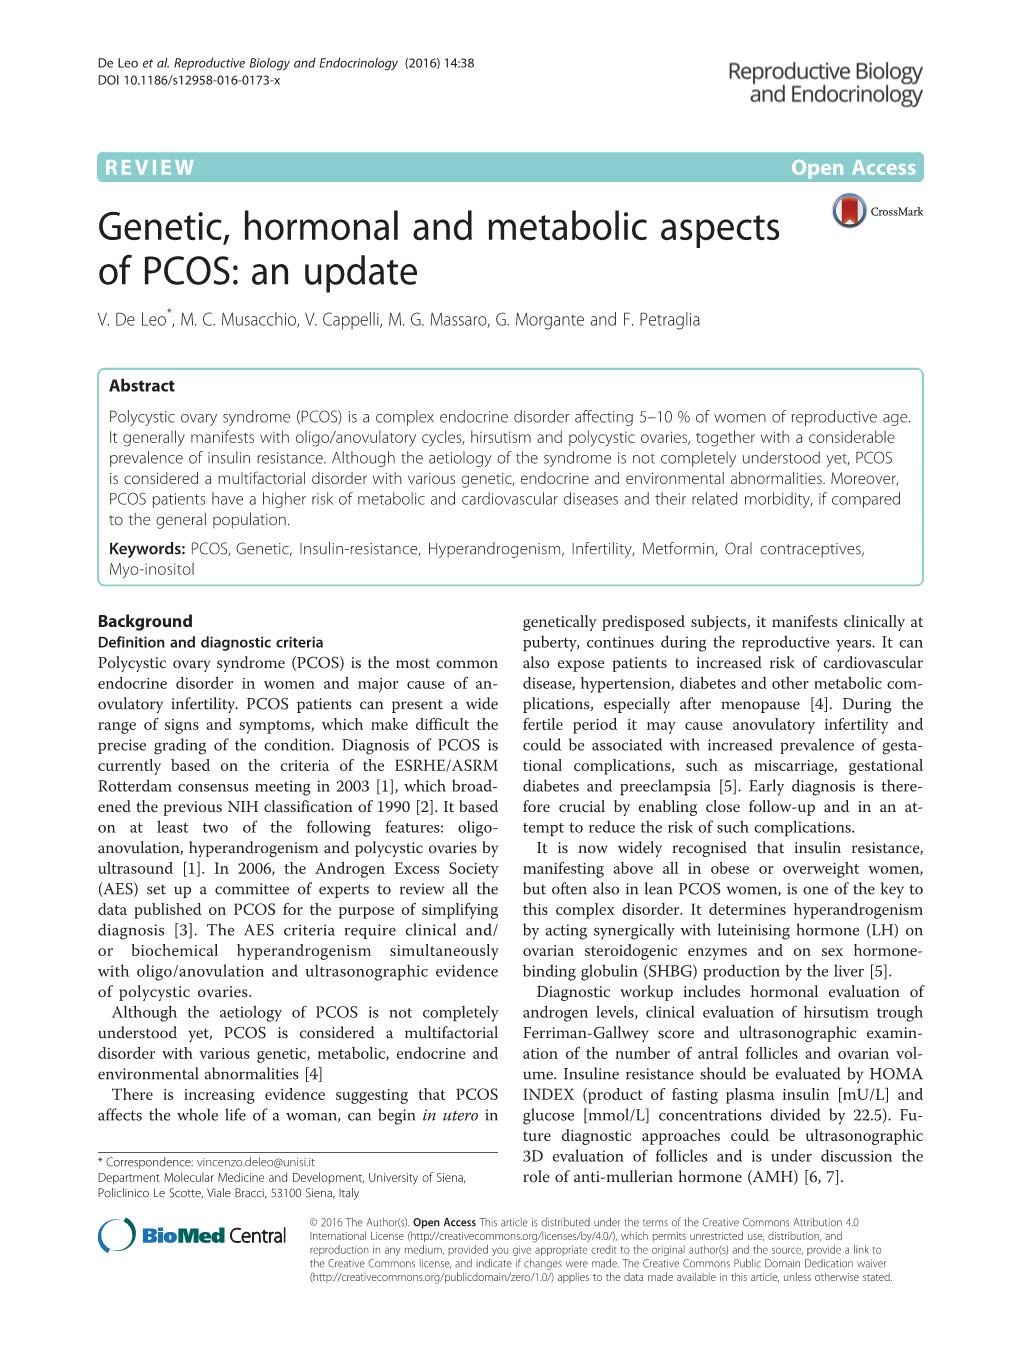 Genetic, Hormonal and Metabolic Aspects of PCOS: an Update V